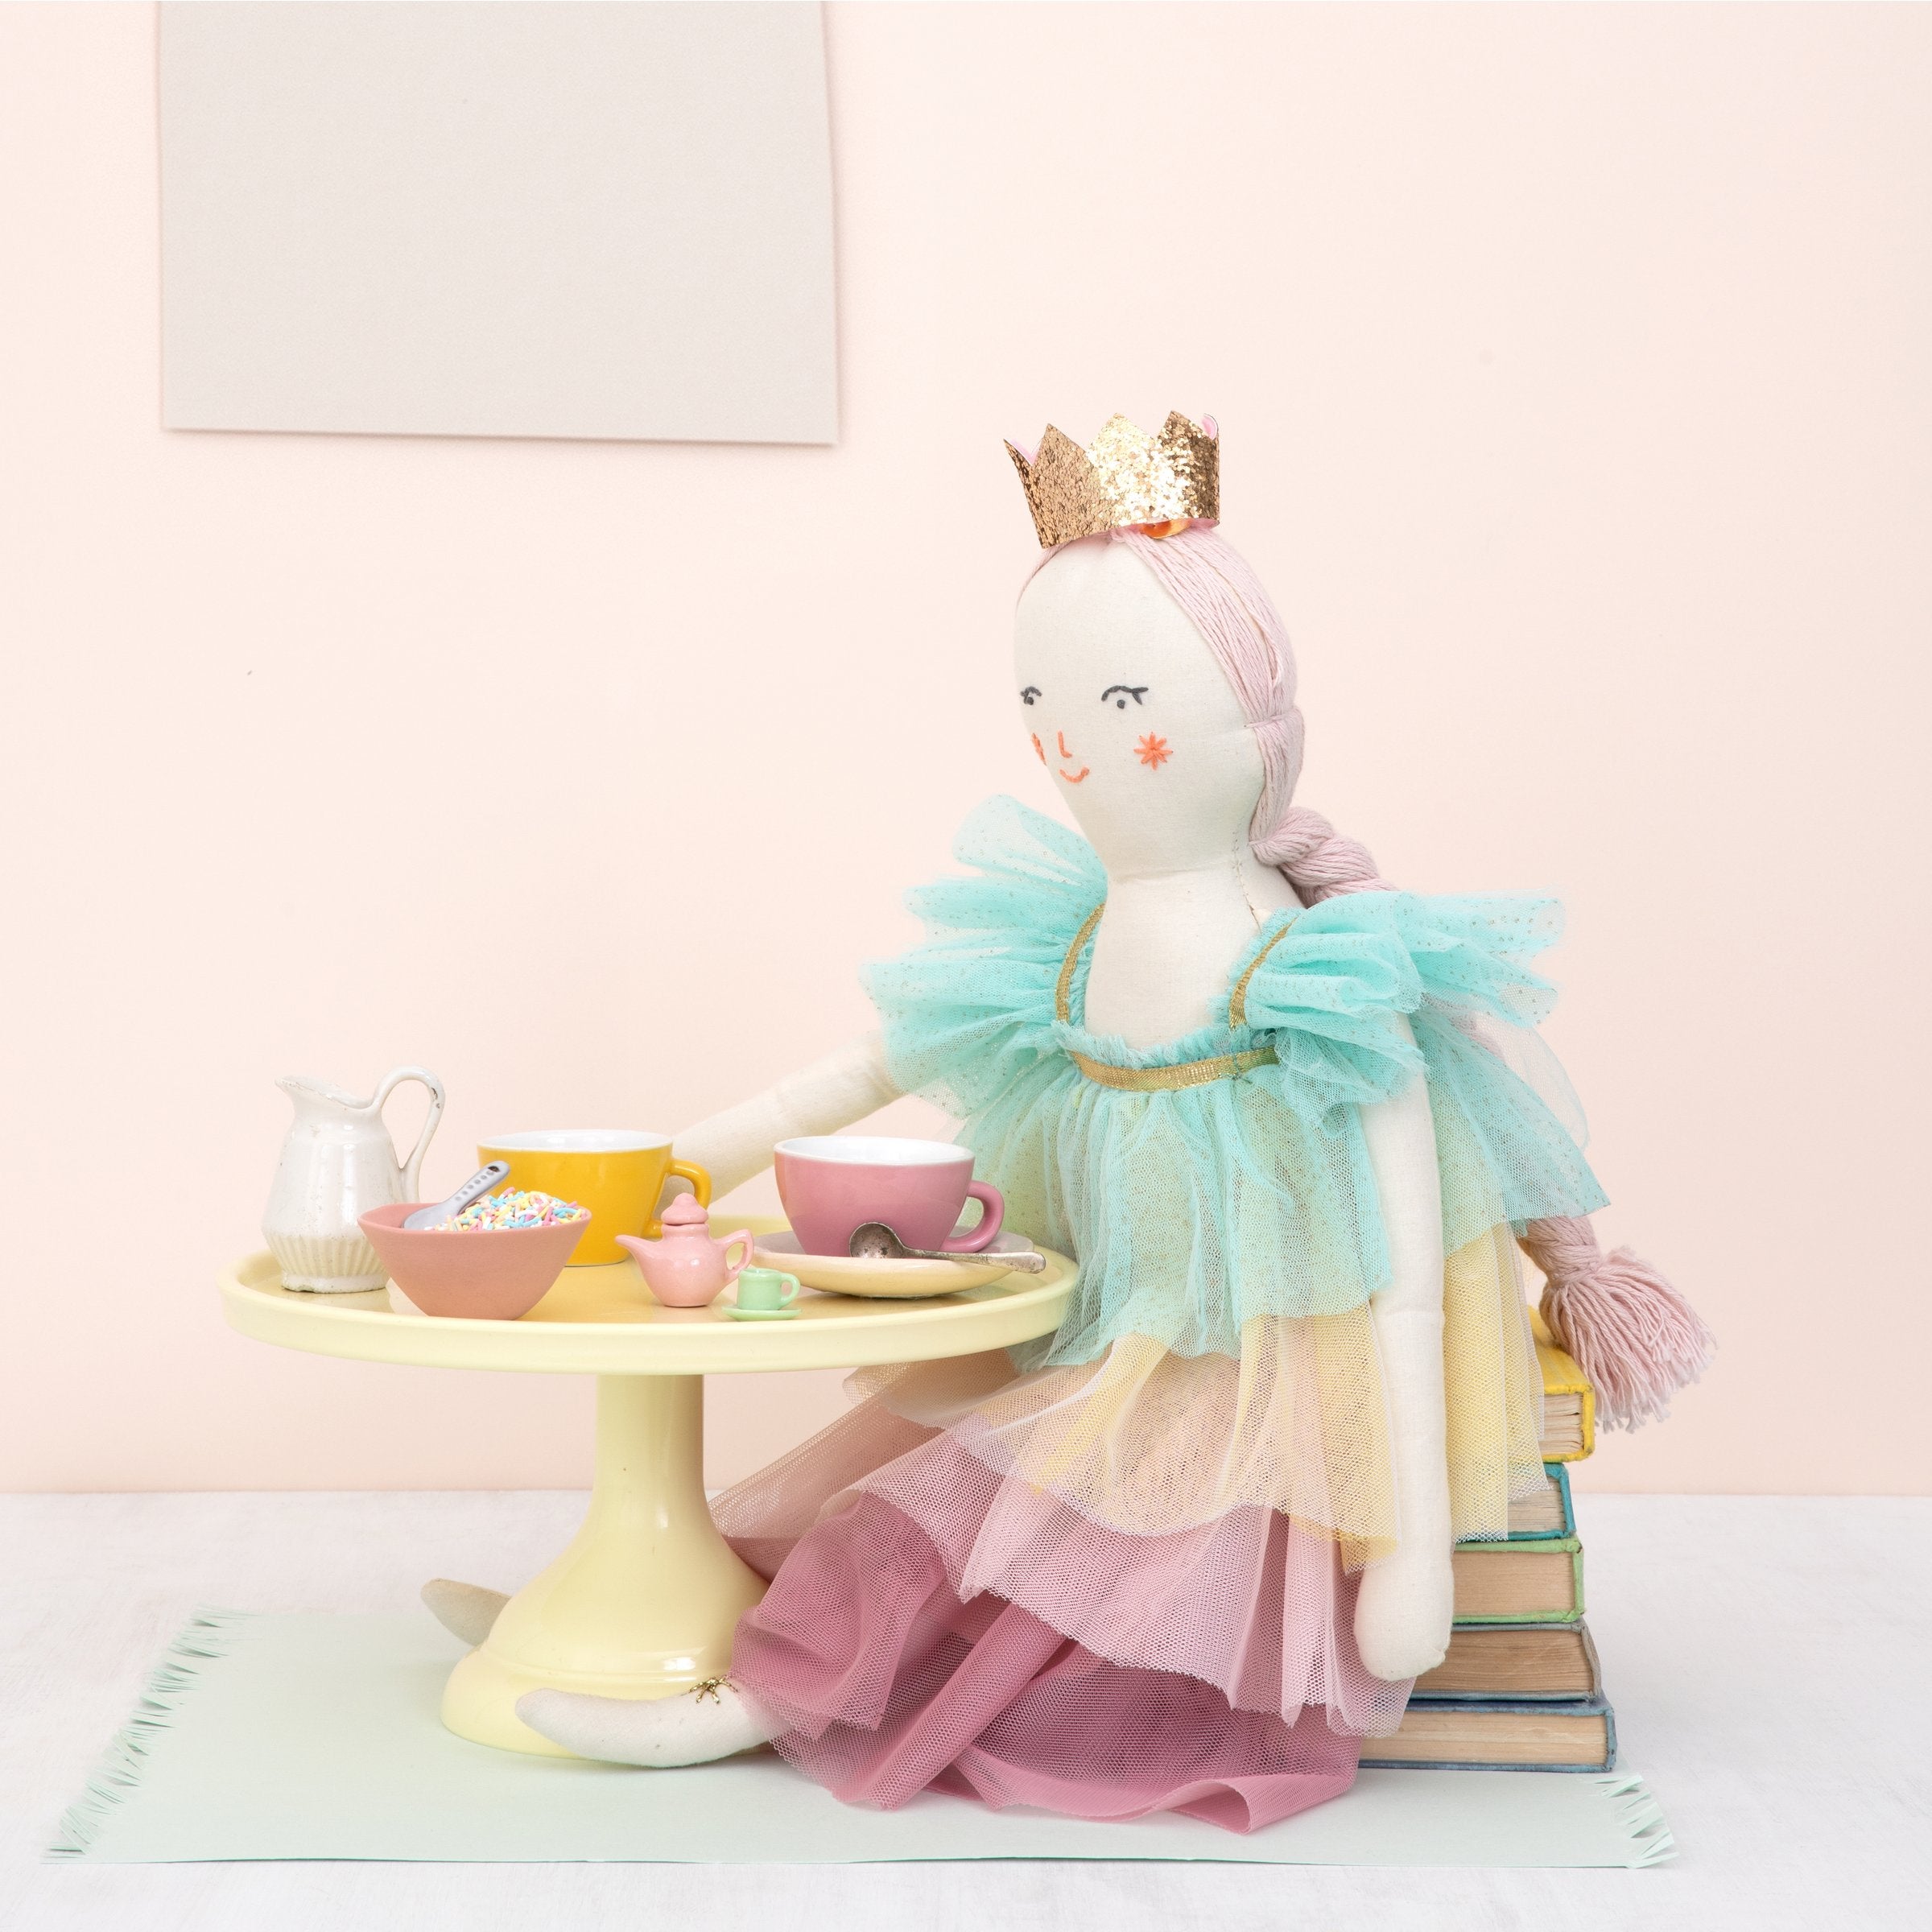 Gemma is a stunning princess toy with a tulle dress and gold crown.